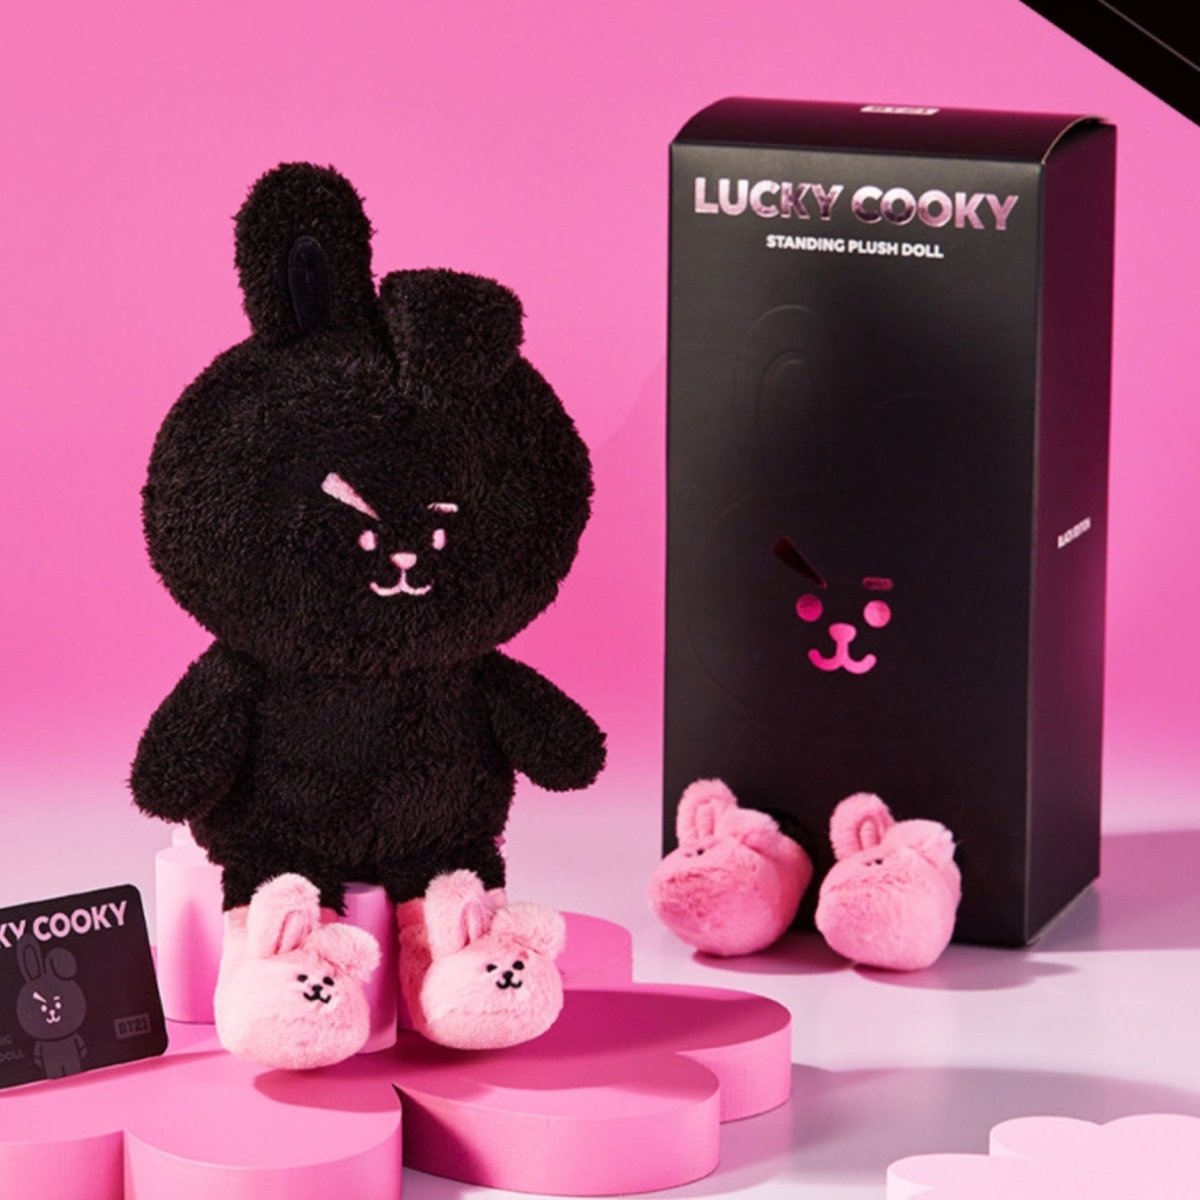 BT LUCKY COOKY BLACK Edition Standing Plush Doll